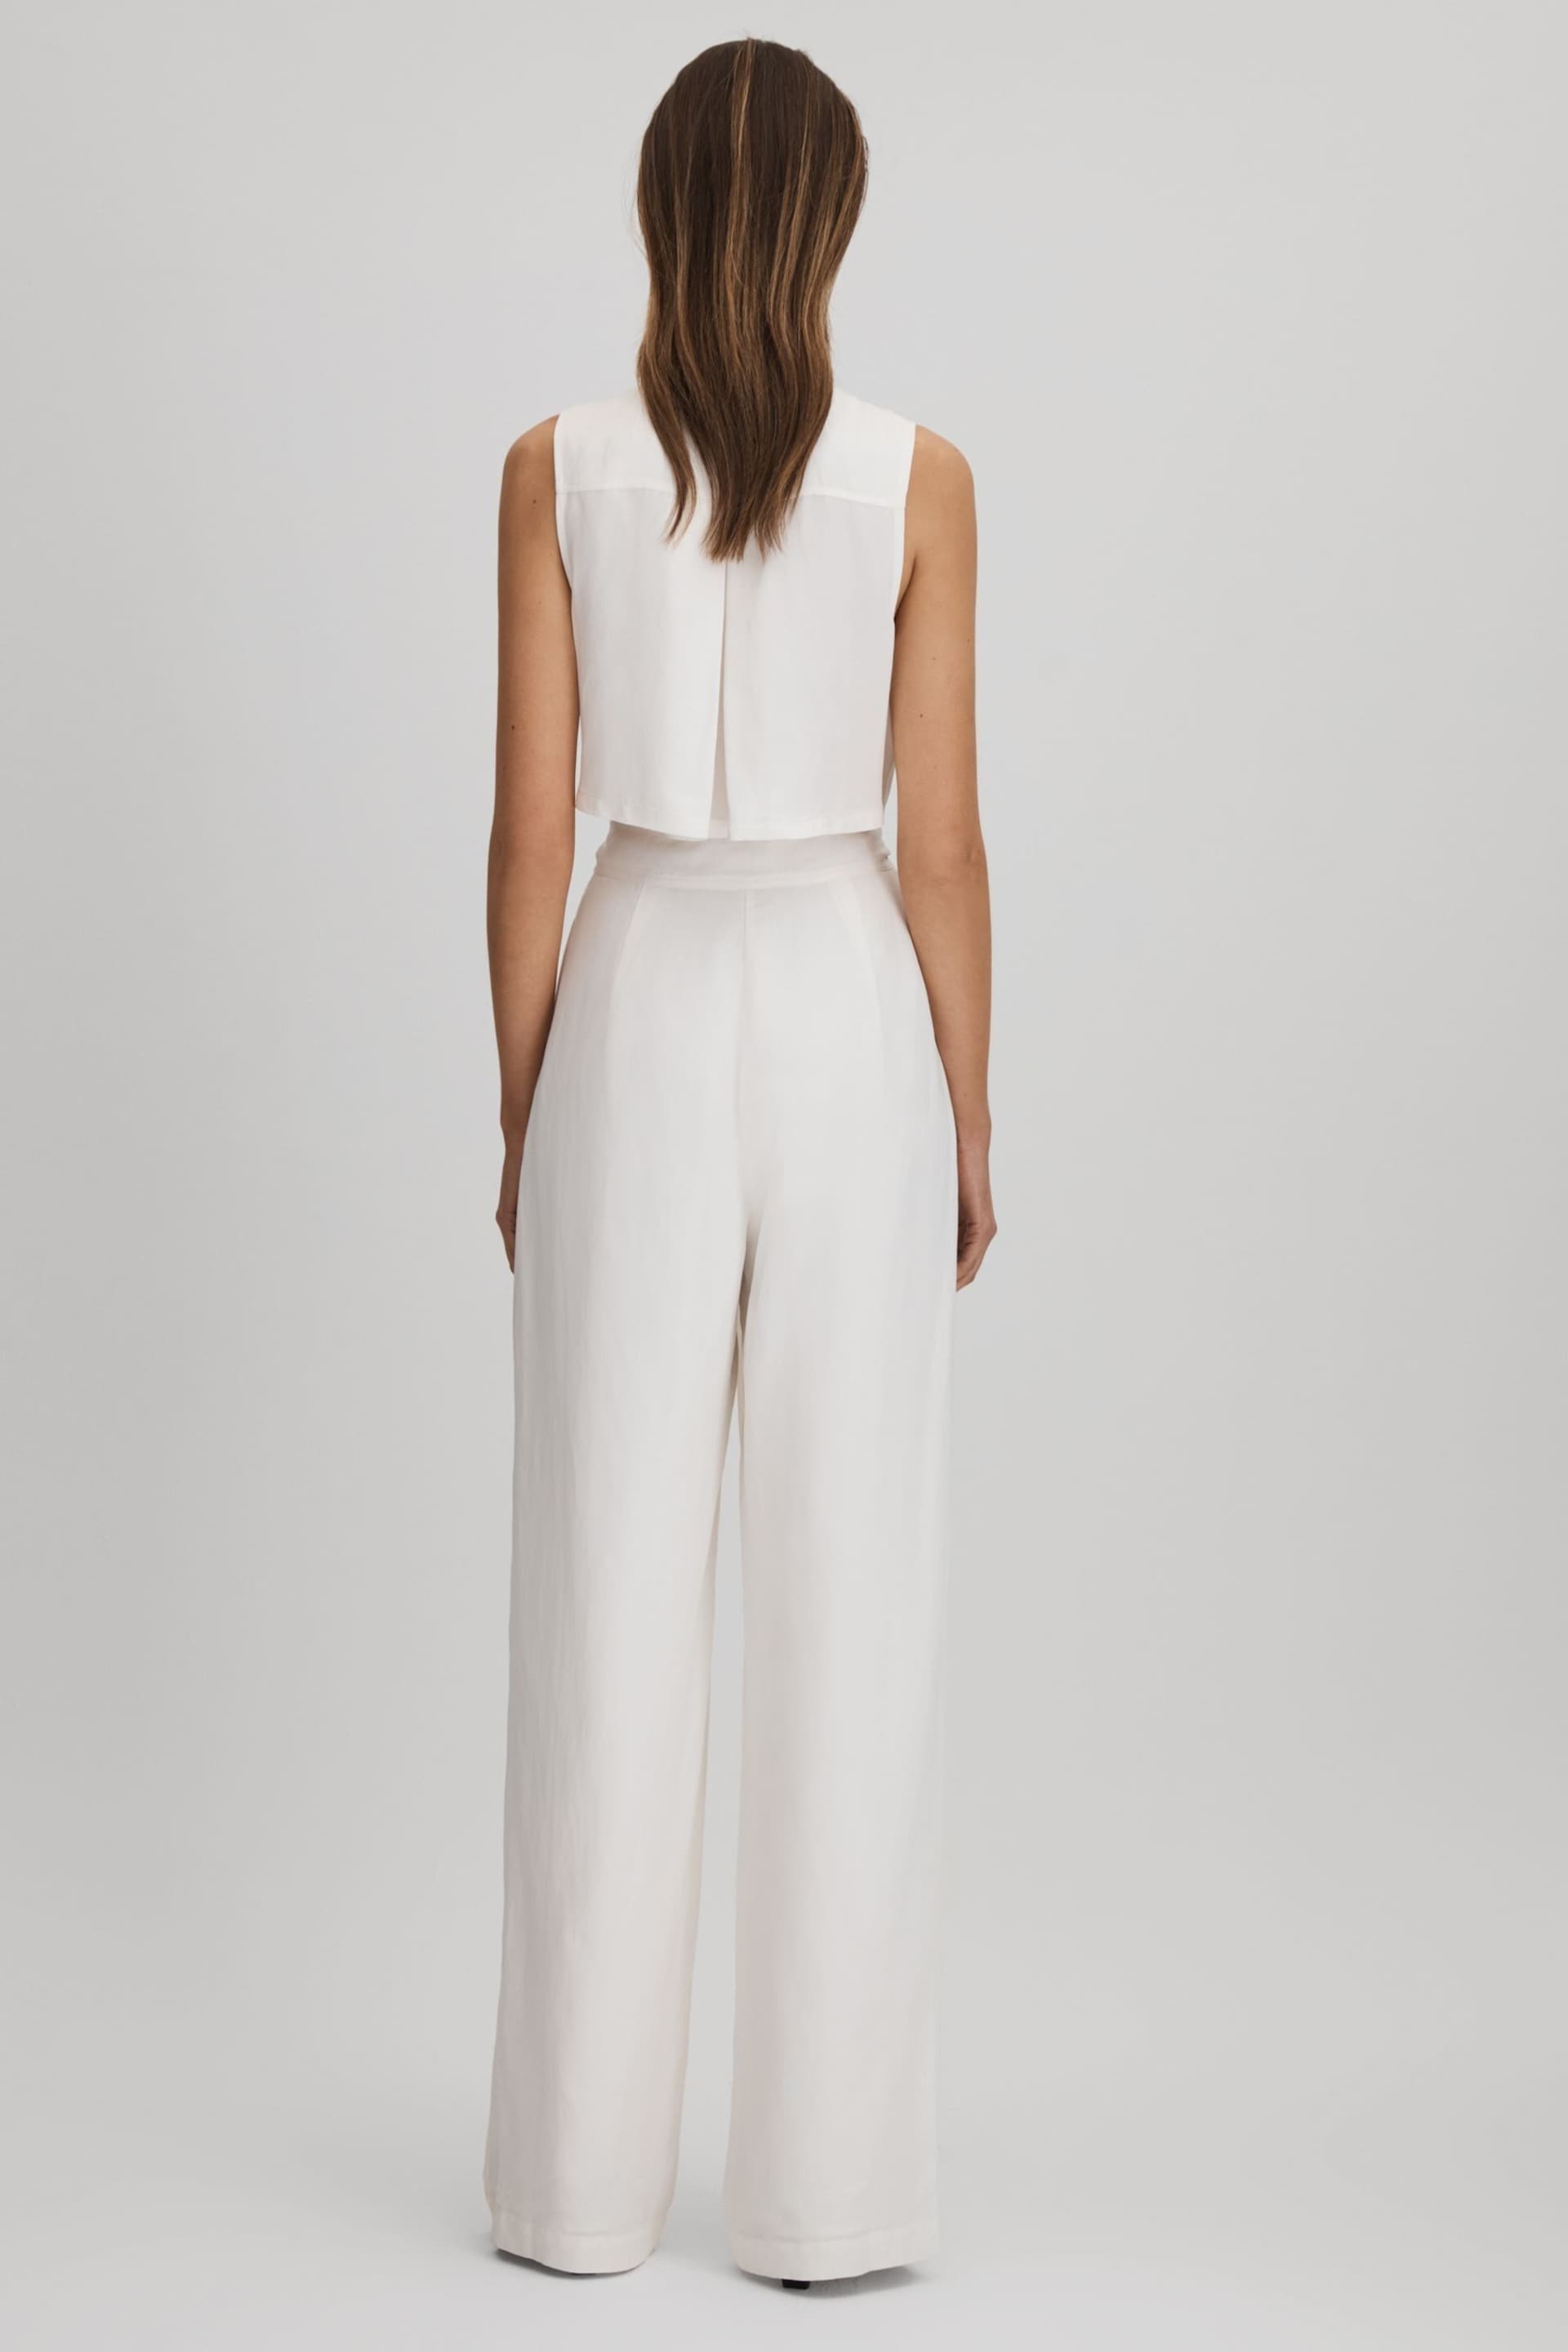 Reiss White Perla Petite Belted Wide Leg Jumpsuit - Image 5 of 7